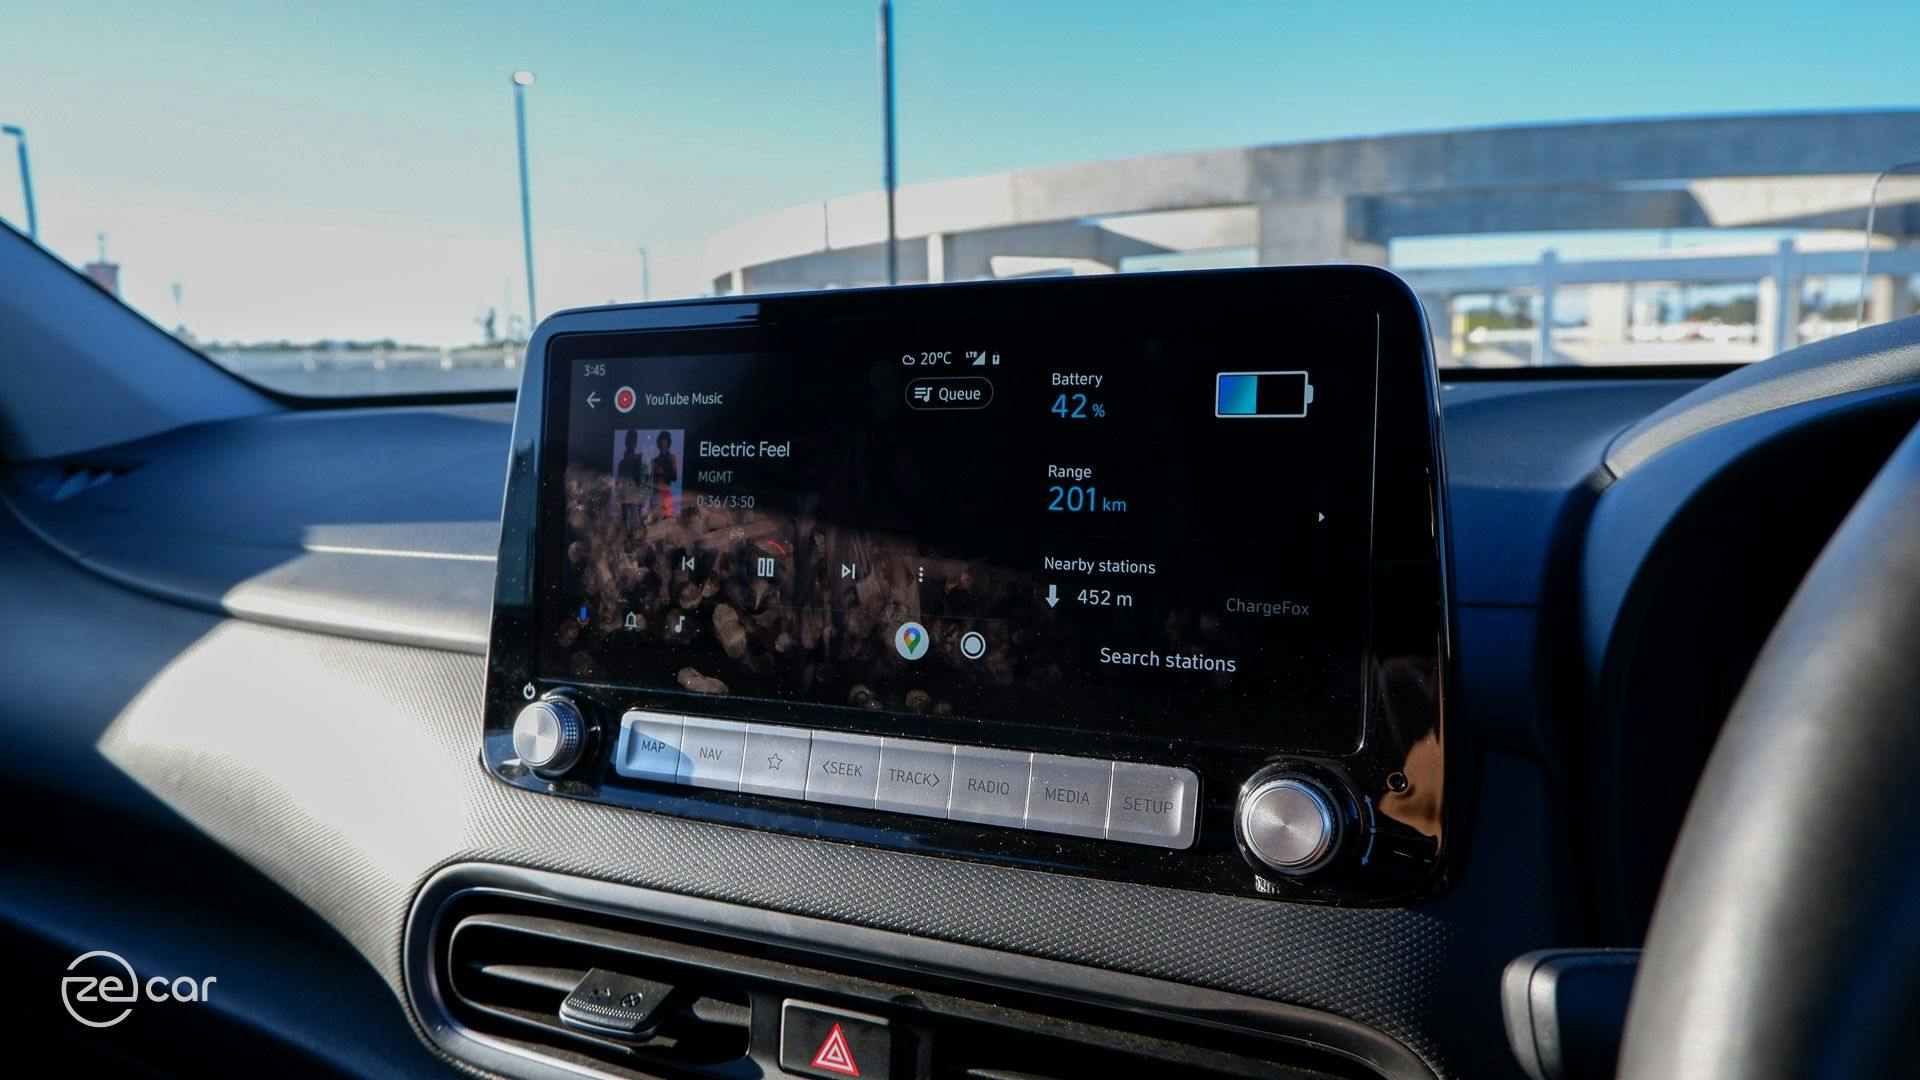 Hyundai Kona Electric touchscreen with Android Auto 'Electric Feel' music displayed and battery percentage